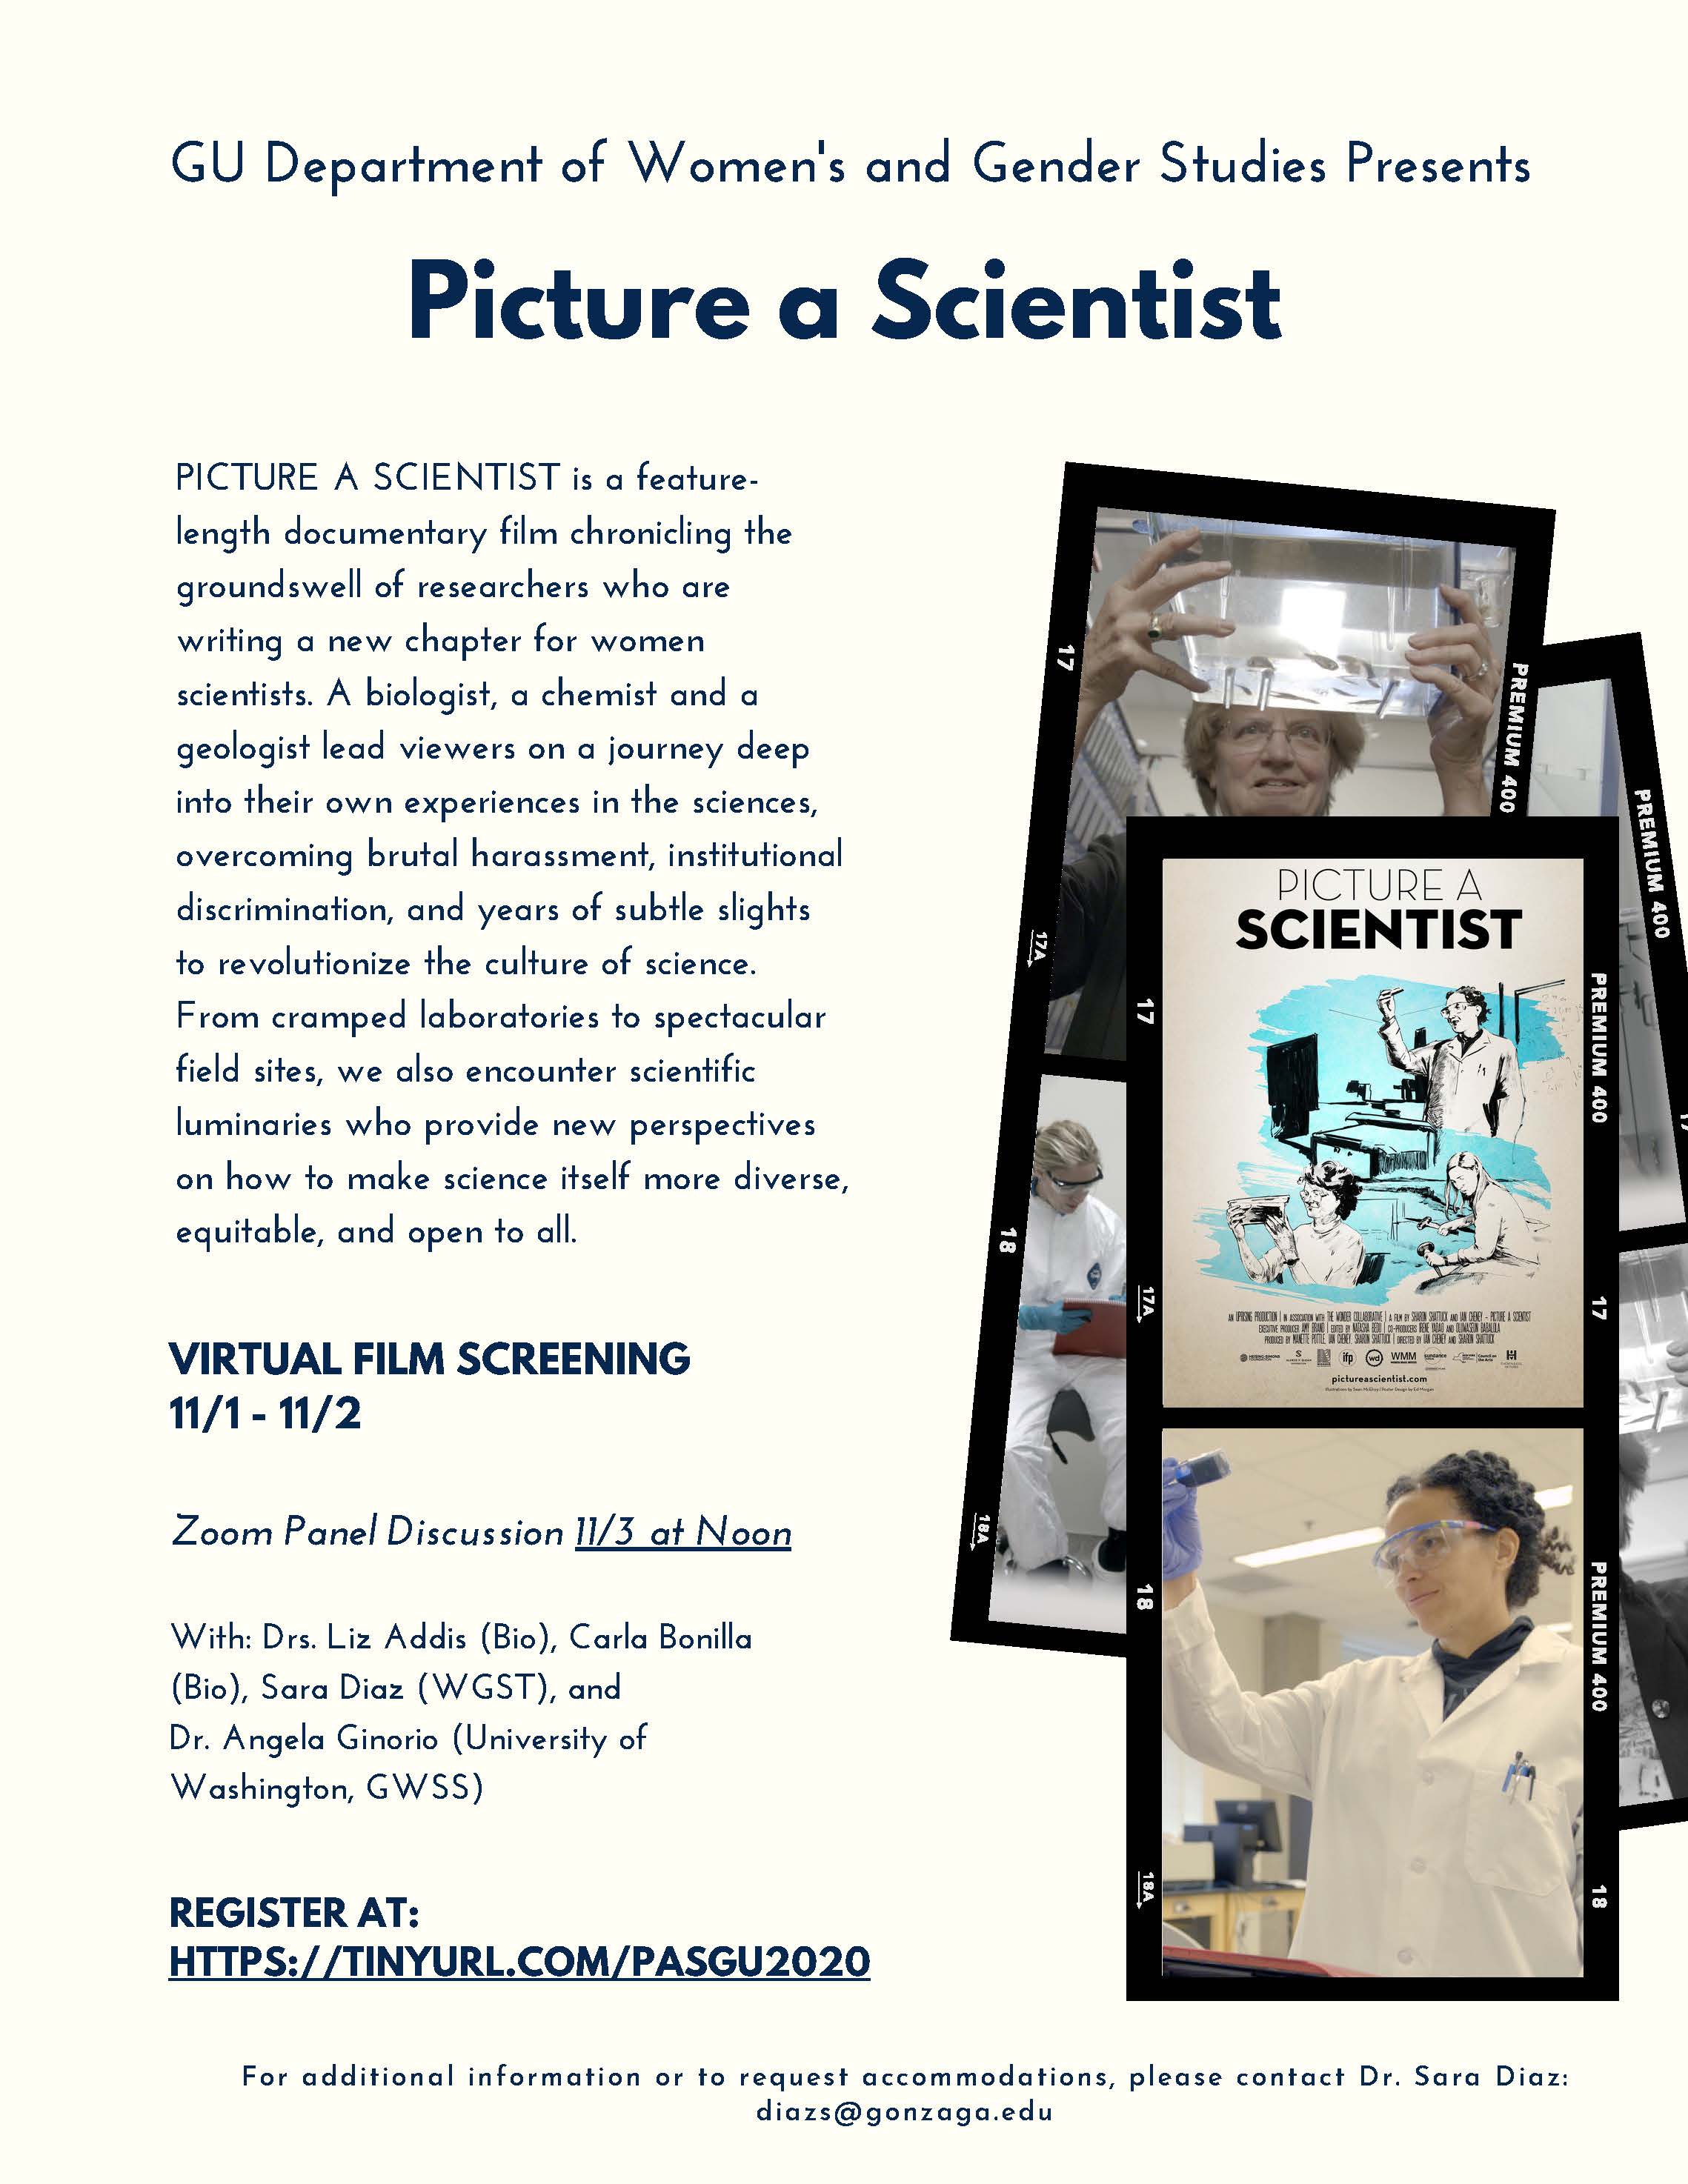 Flyer for the documentary movie screening, "Picture a Scientist".